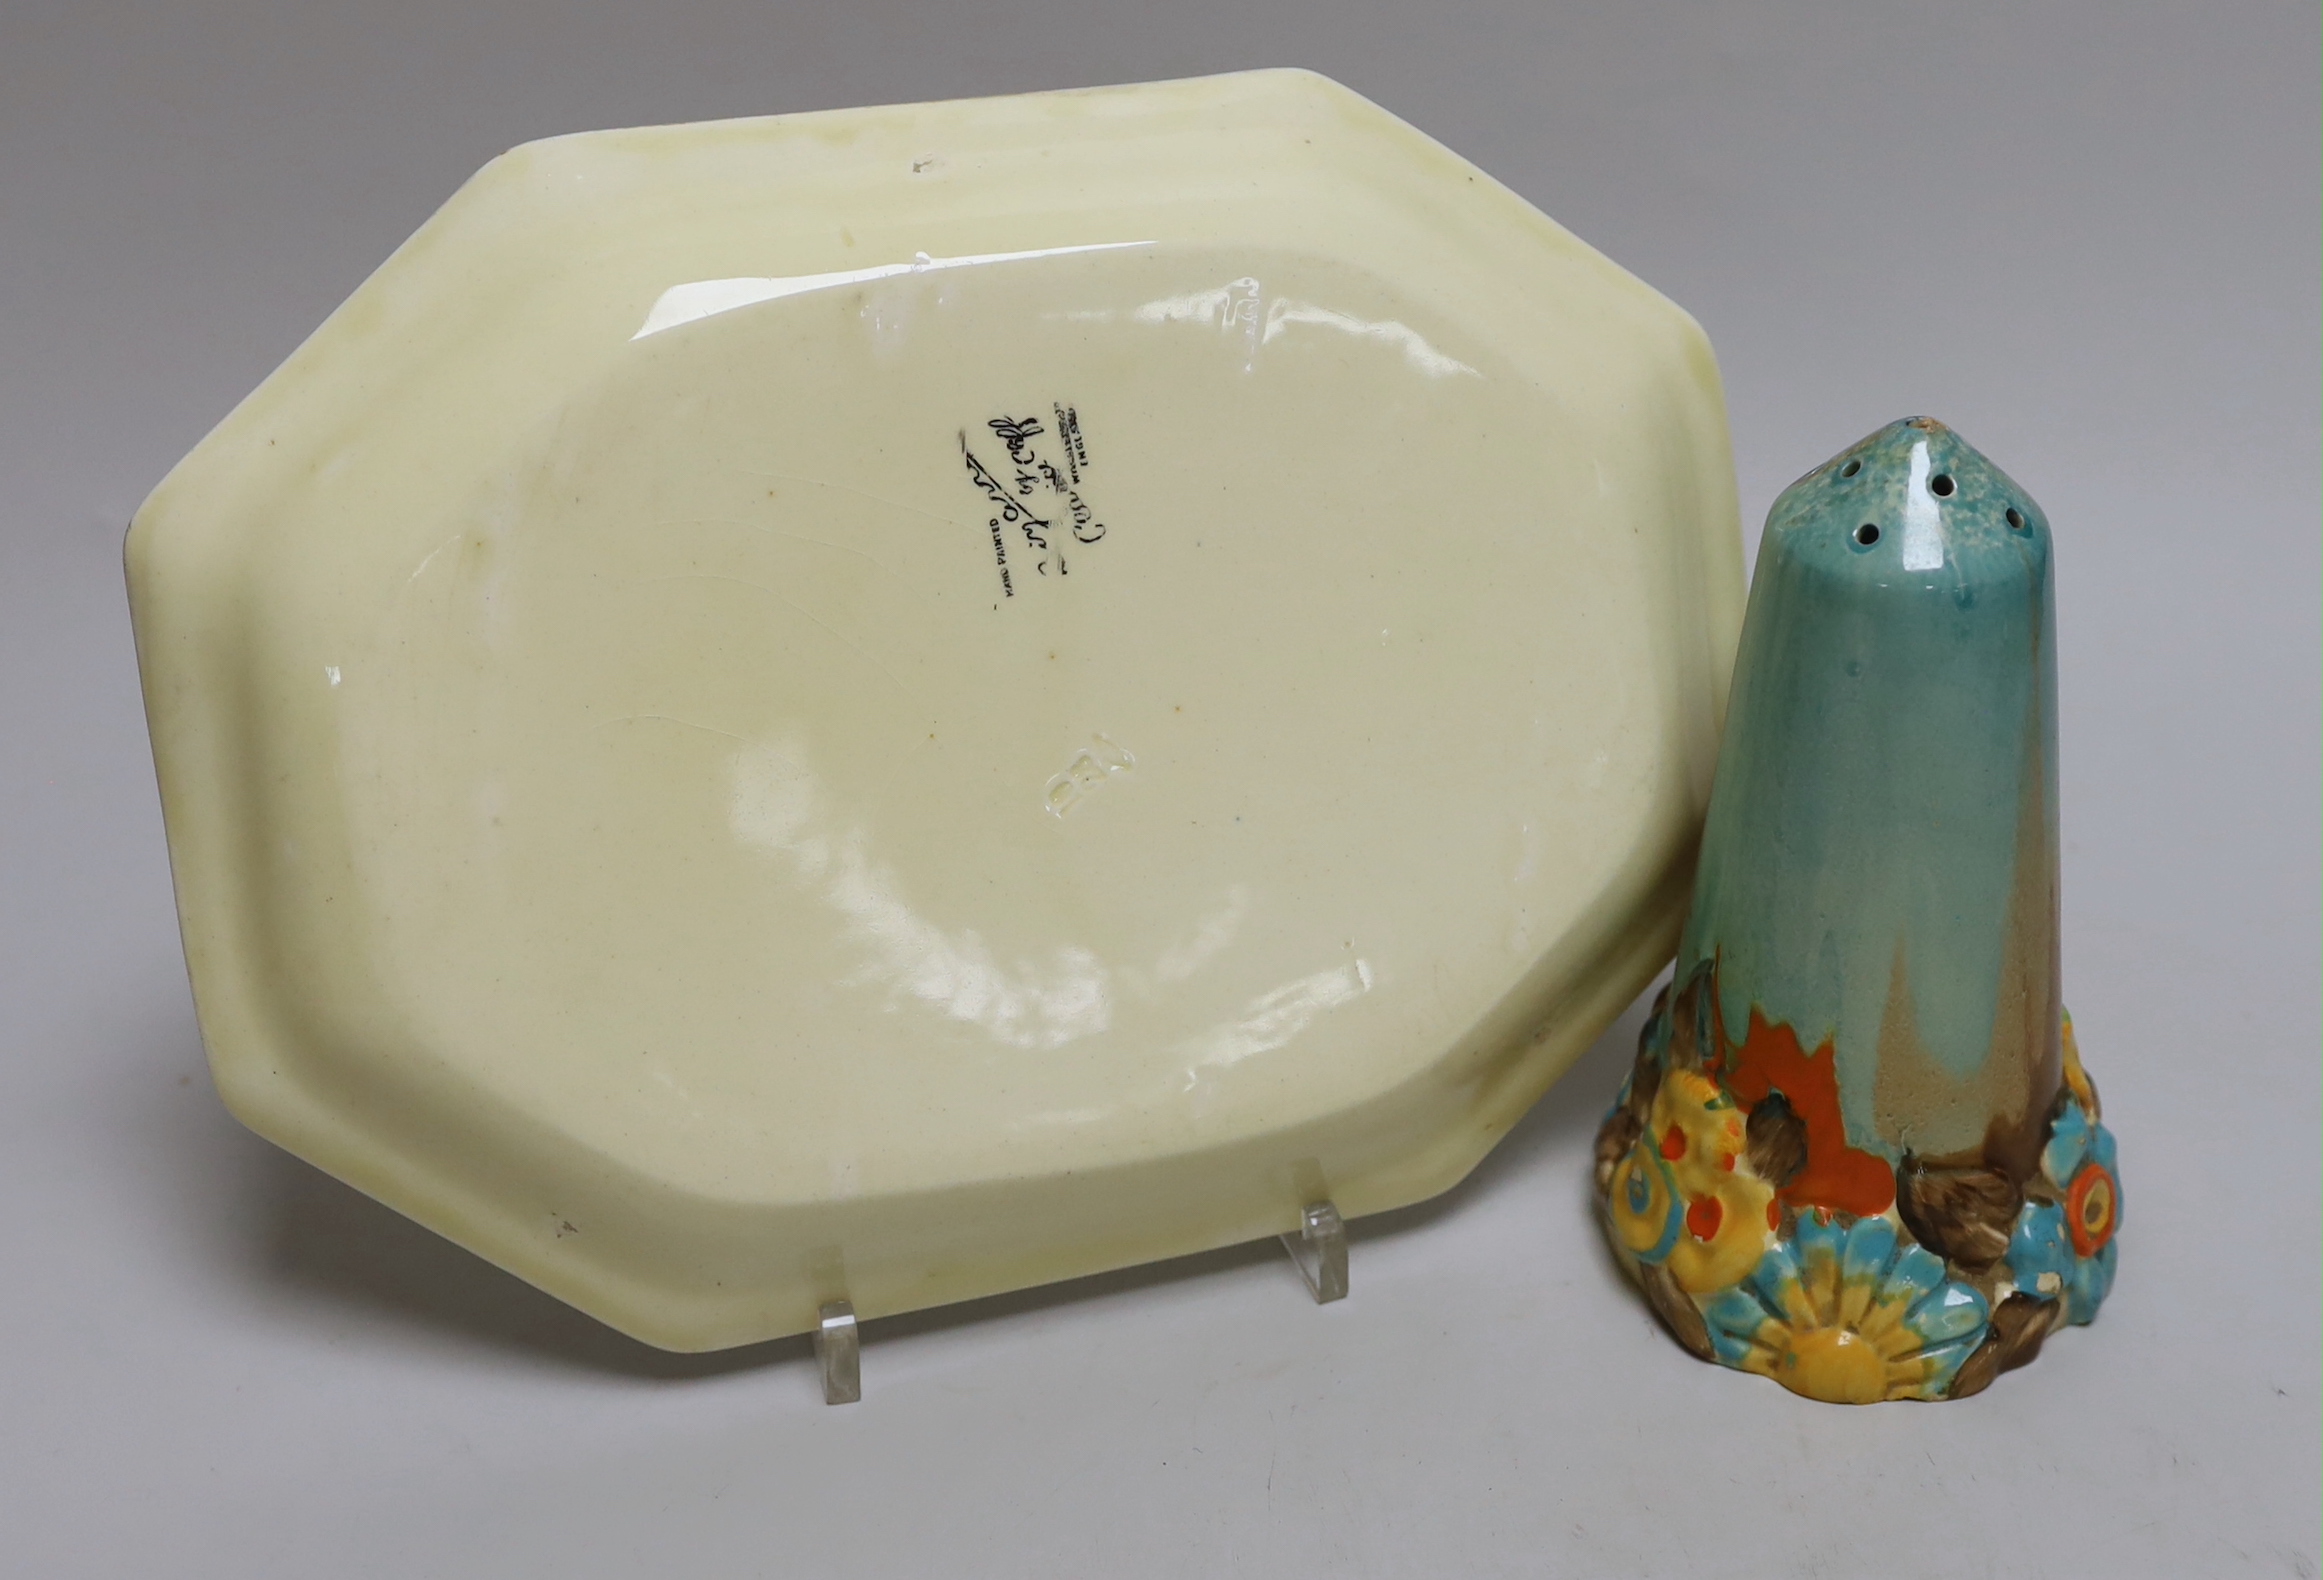 A Clarice Cliff 'My garden' sugar sifter and a Clarice Cliff Rhodanthe dish, 25cm